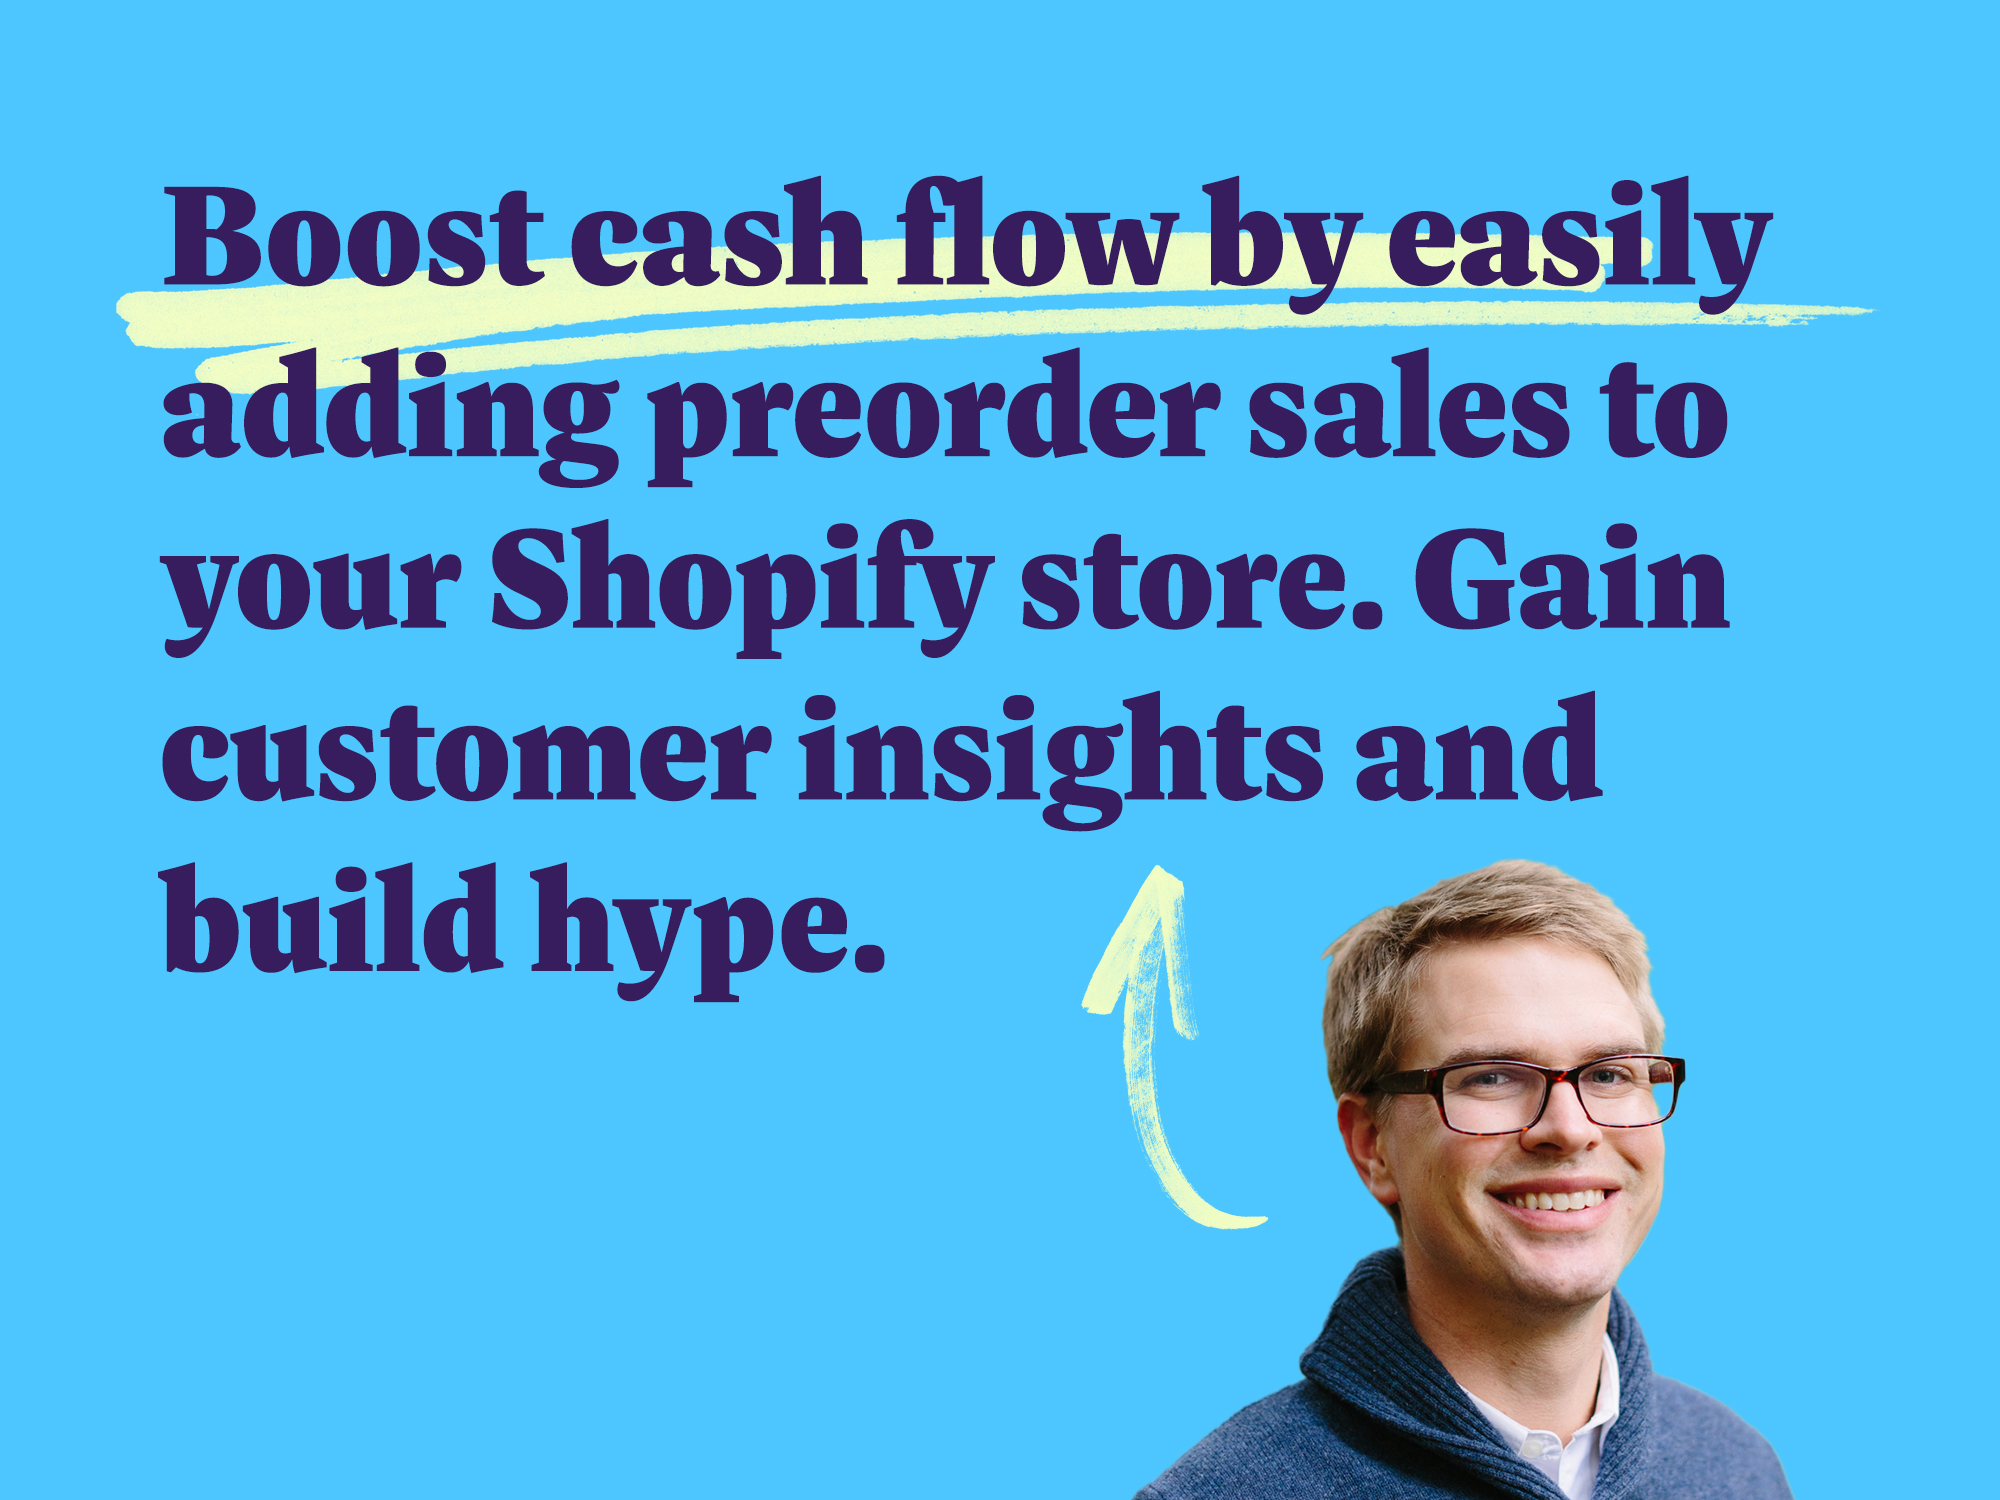 Boost cash flow by easily adding preorder sales to your Shopify store. Gain customer insights and build hype.